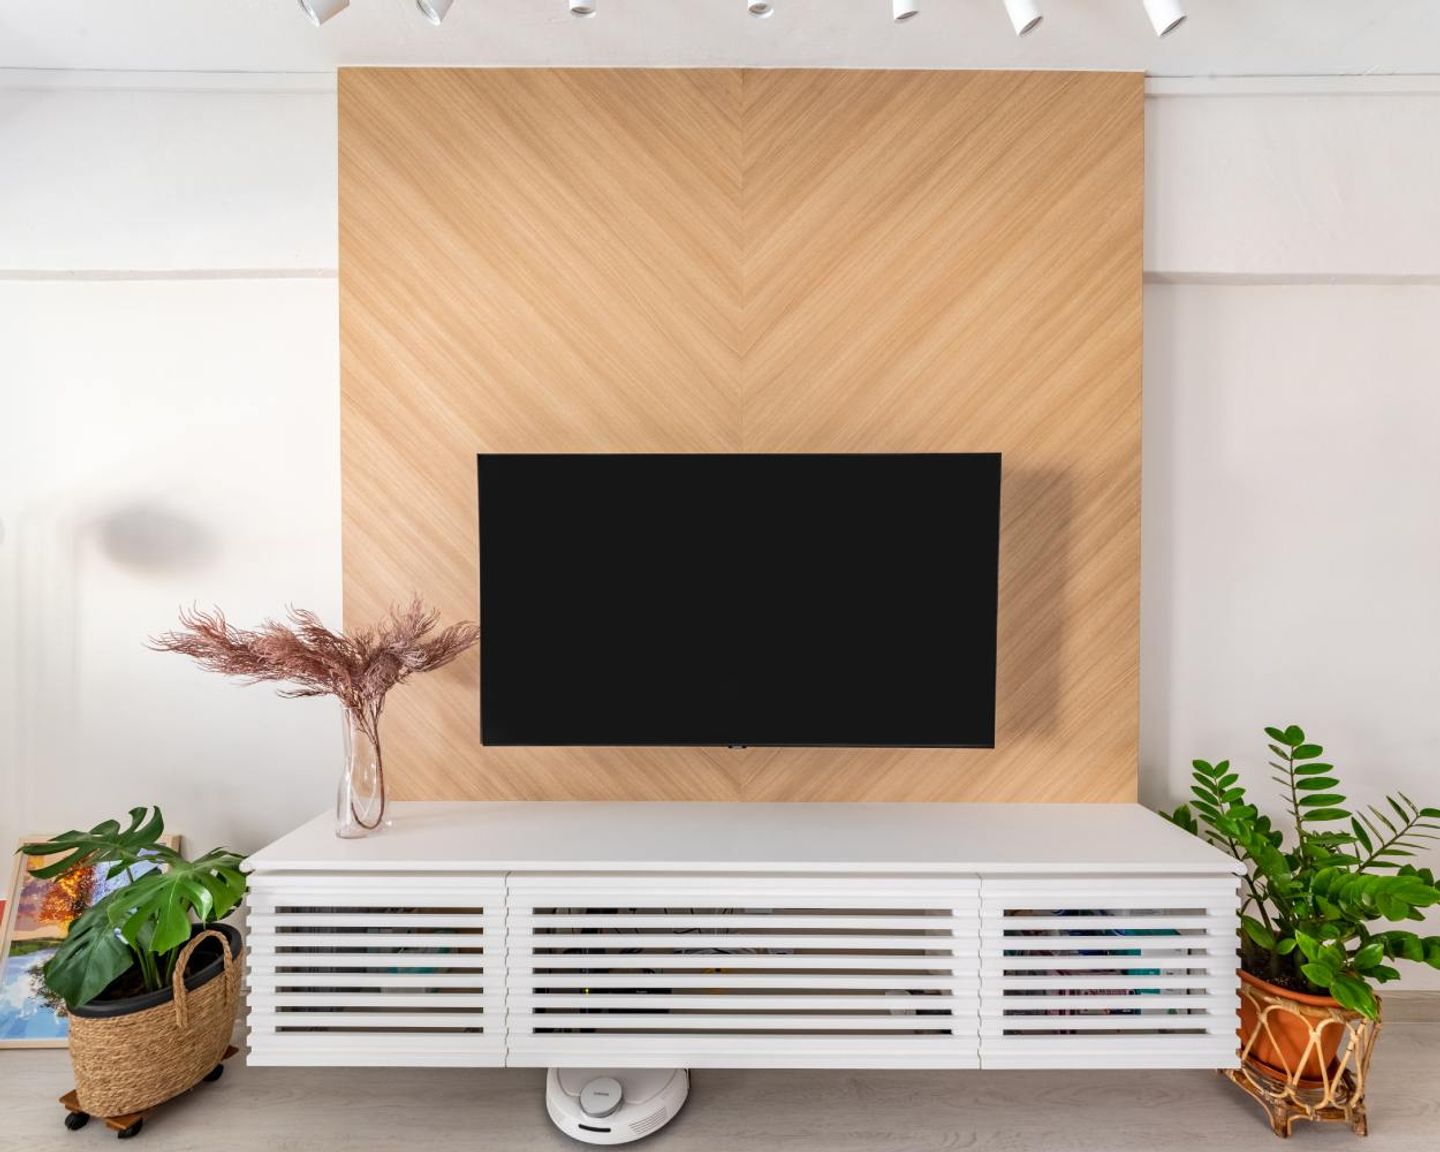 Wall-Mounted Classic TV Cabinet - Livspace